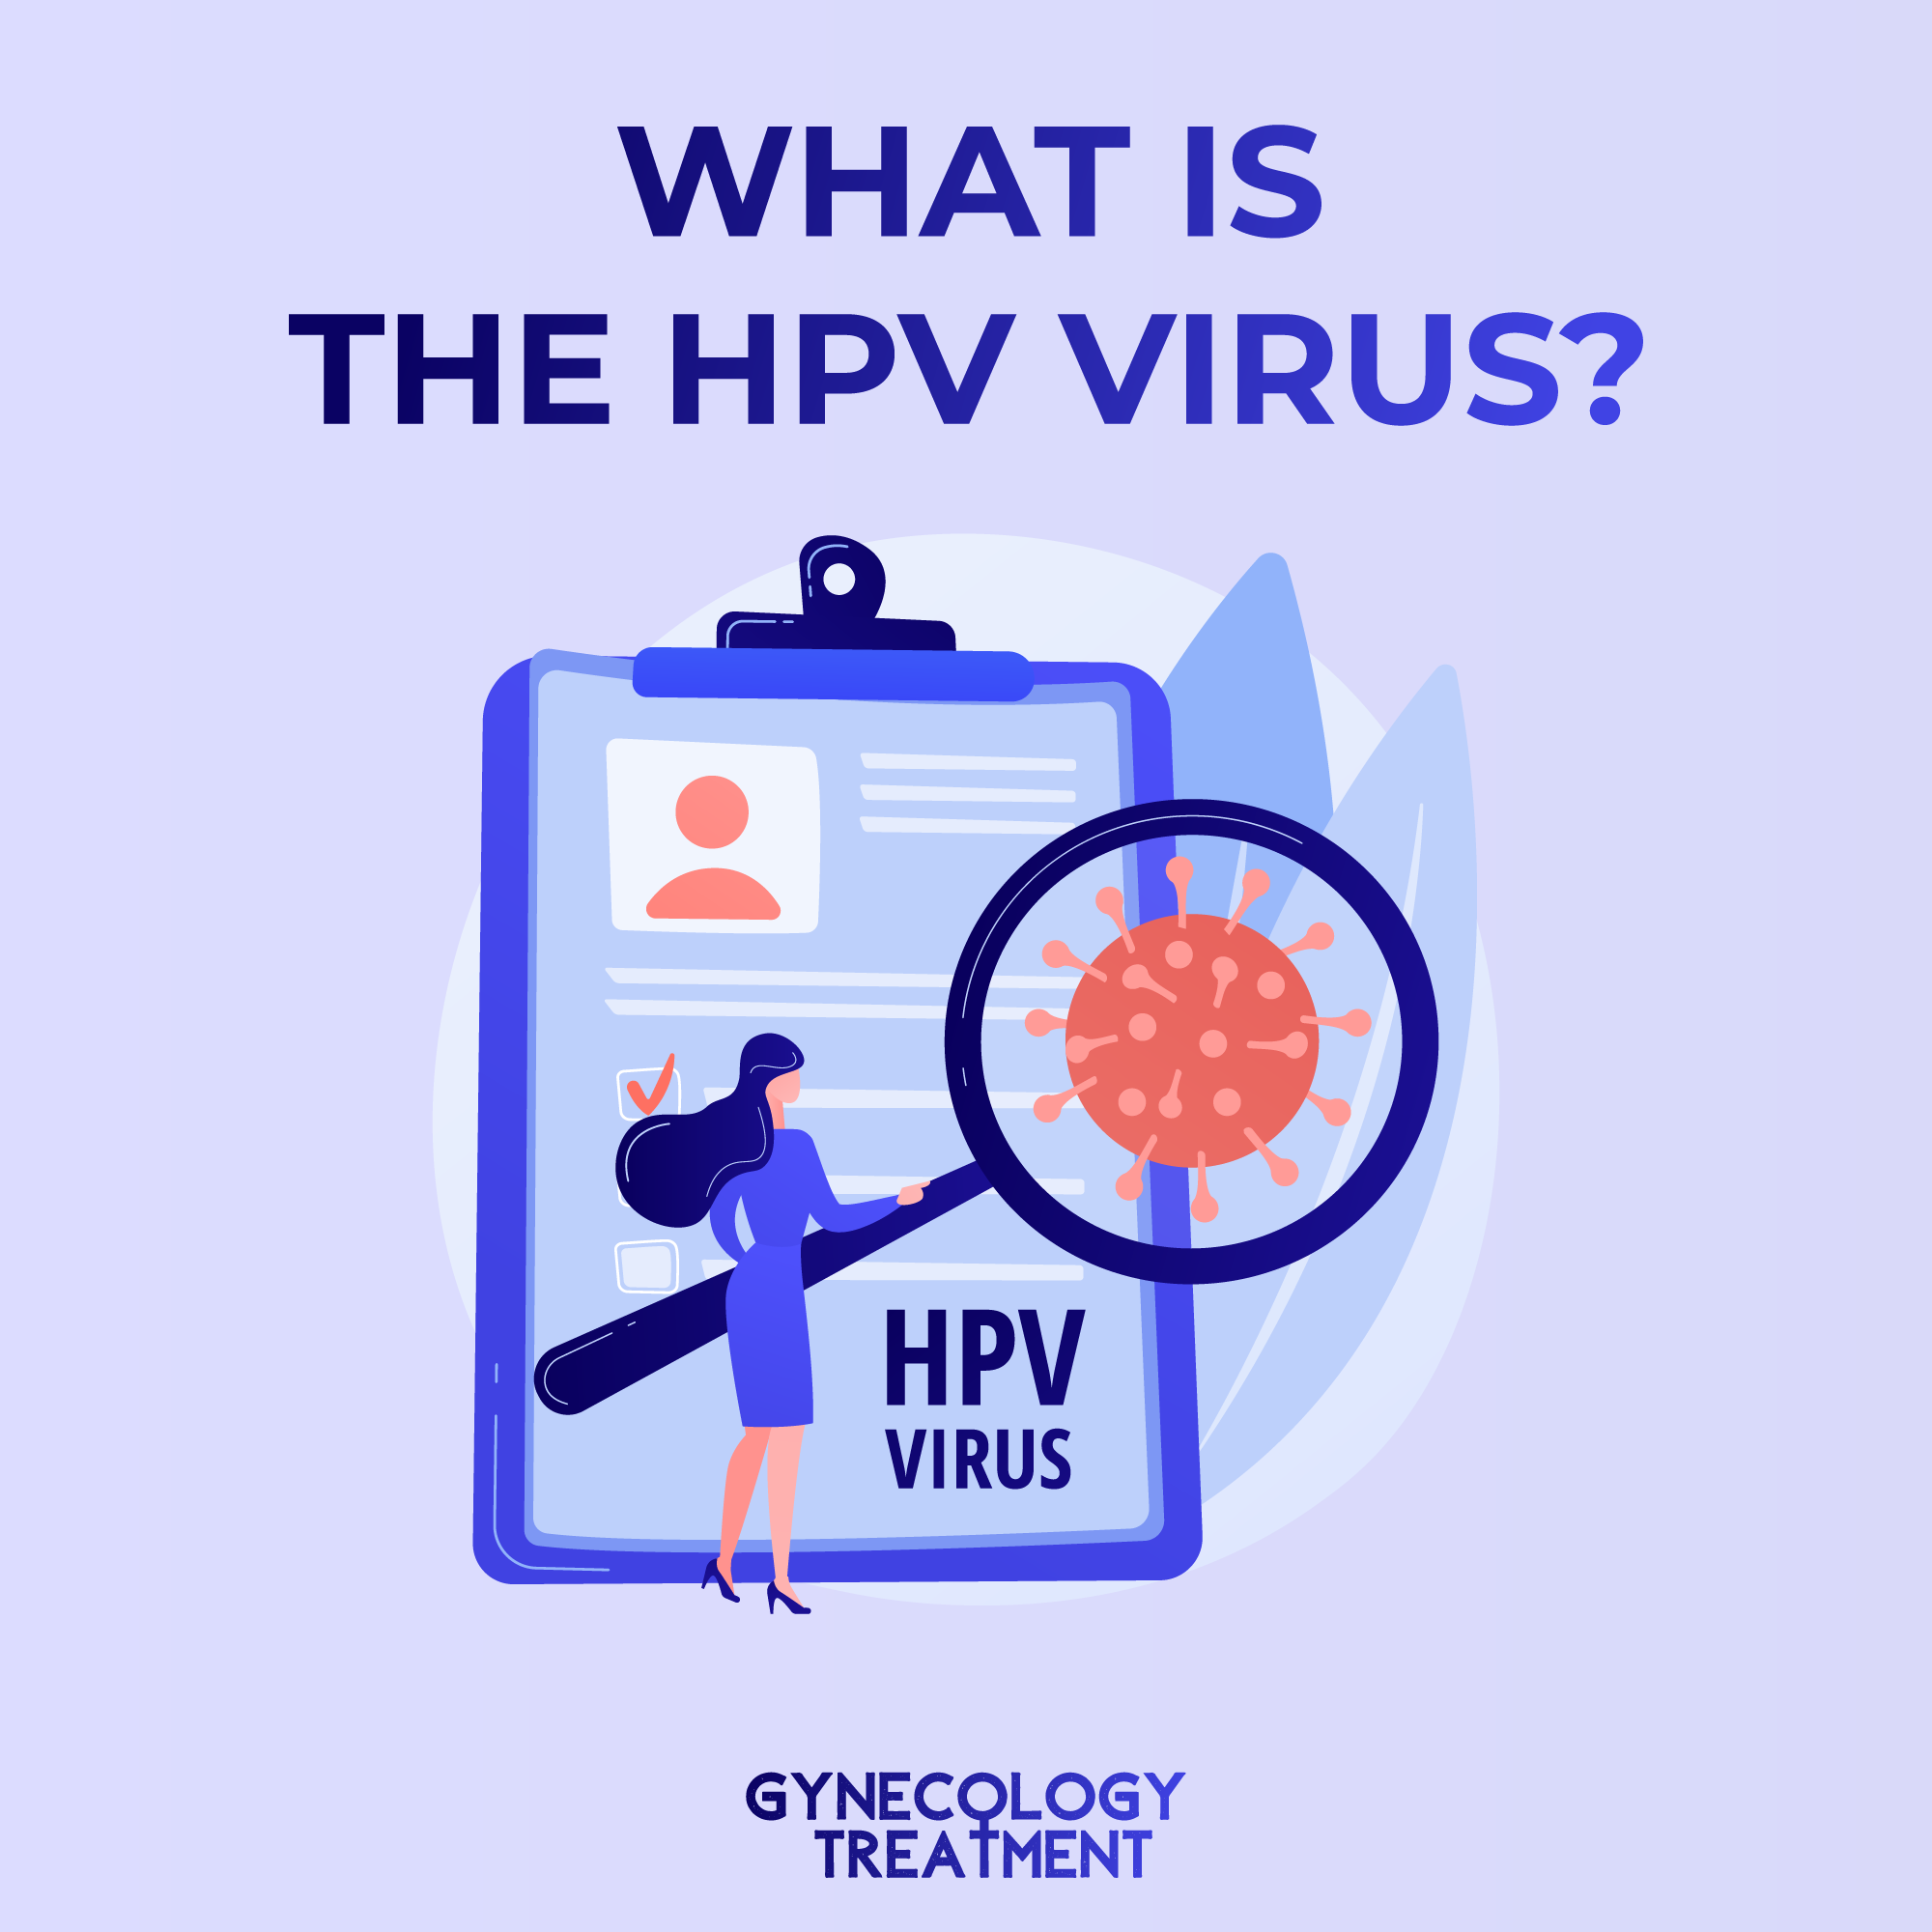 What is the HPV virus?